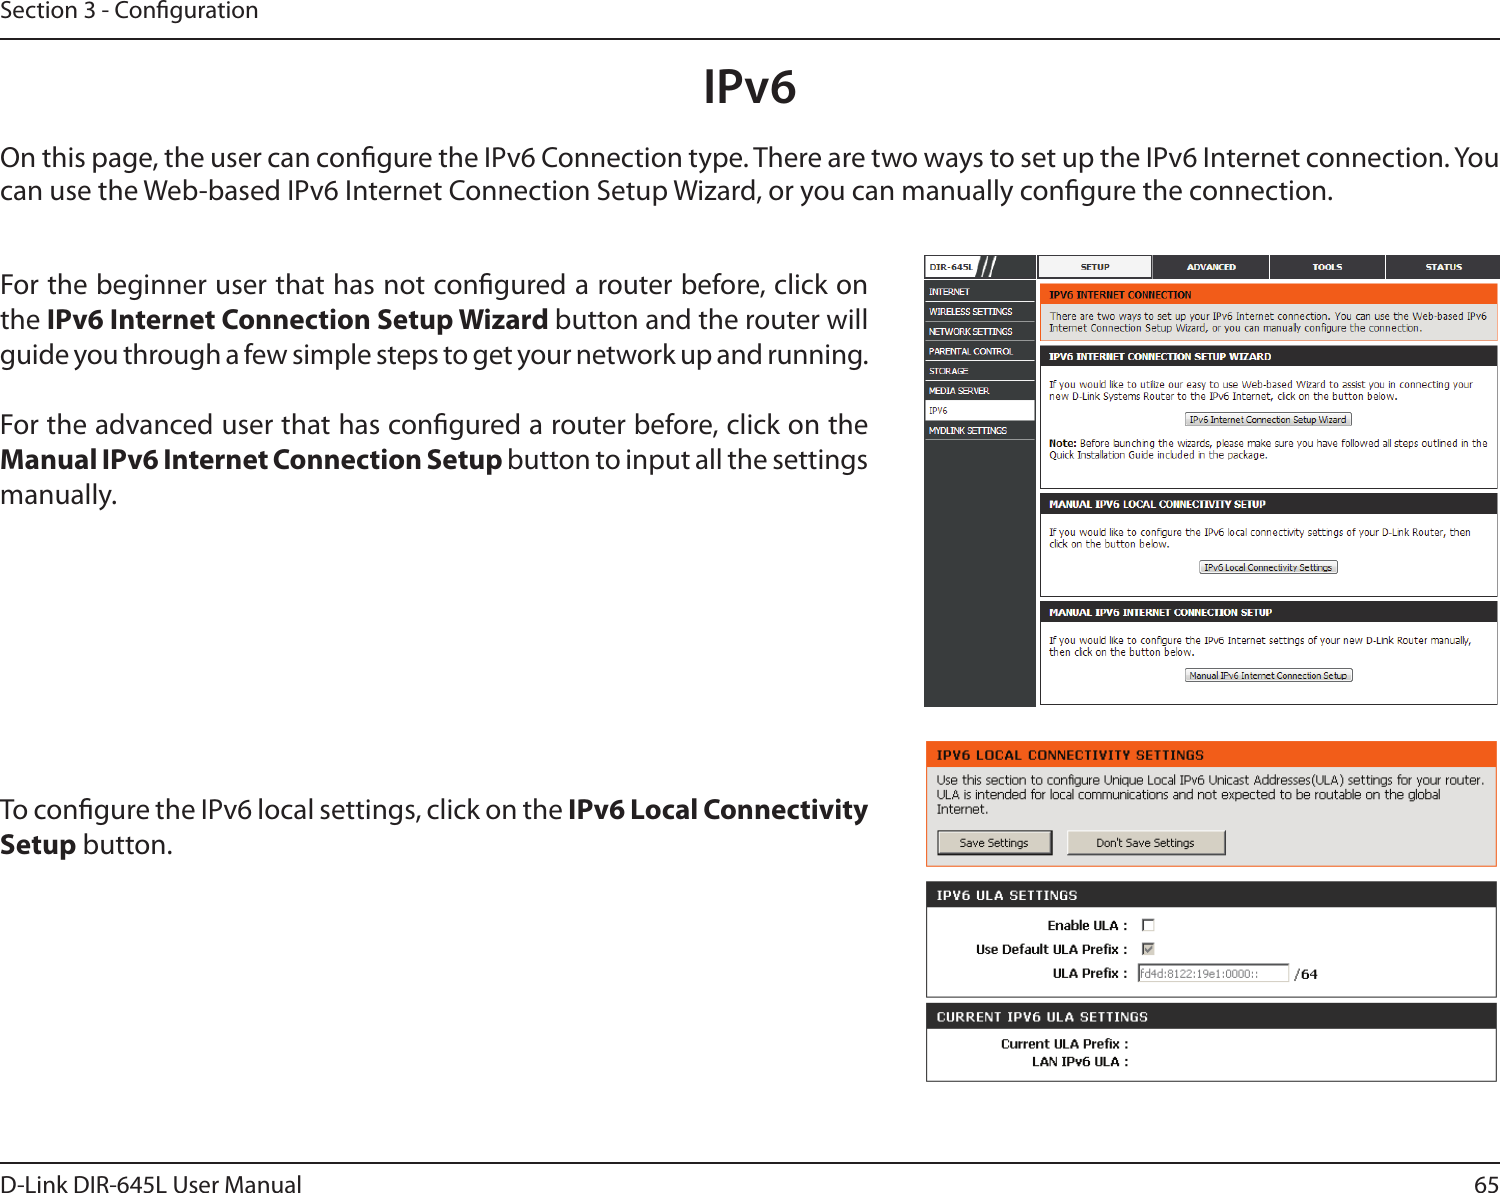 65D-Link DIR-645L User ManualSection 3 - CongurationIPv6On this page, the user can congure the IPv6 Connection type. There are two ways to set up the IPv6 Internet connection. You can use the Web-based IPv6 Internet Connection Setup Wizard, or you can manually congure the connection.For the beginner user that has not congured a router before, click on the IPv6 Internet Connection Setup Wizard button and the router will guide you through a few simple steps to get your network up and running.For the advanced user that has congured a router before, click on the Manual IPv6 Internet Connection Setup button to input all the settings manually.To congure the IPv6 local settings, click on the IPv6 Local Connectivity Setup button.